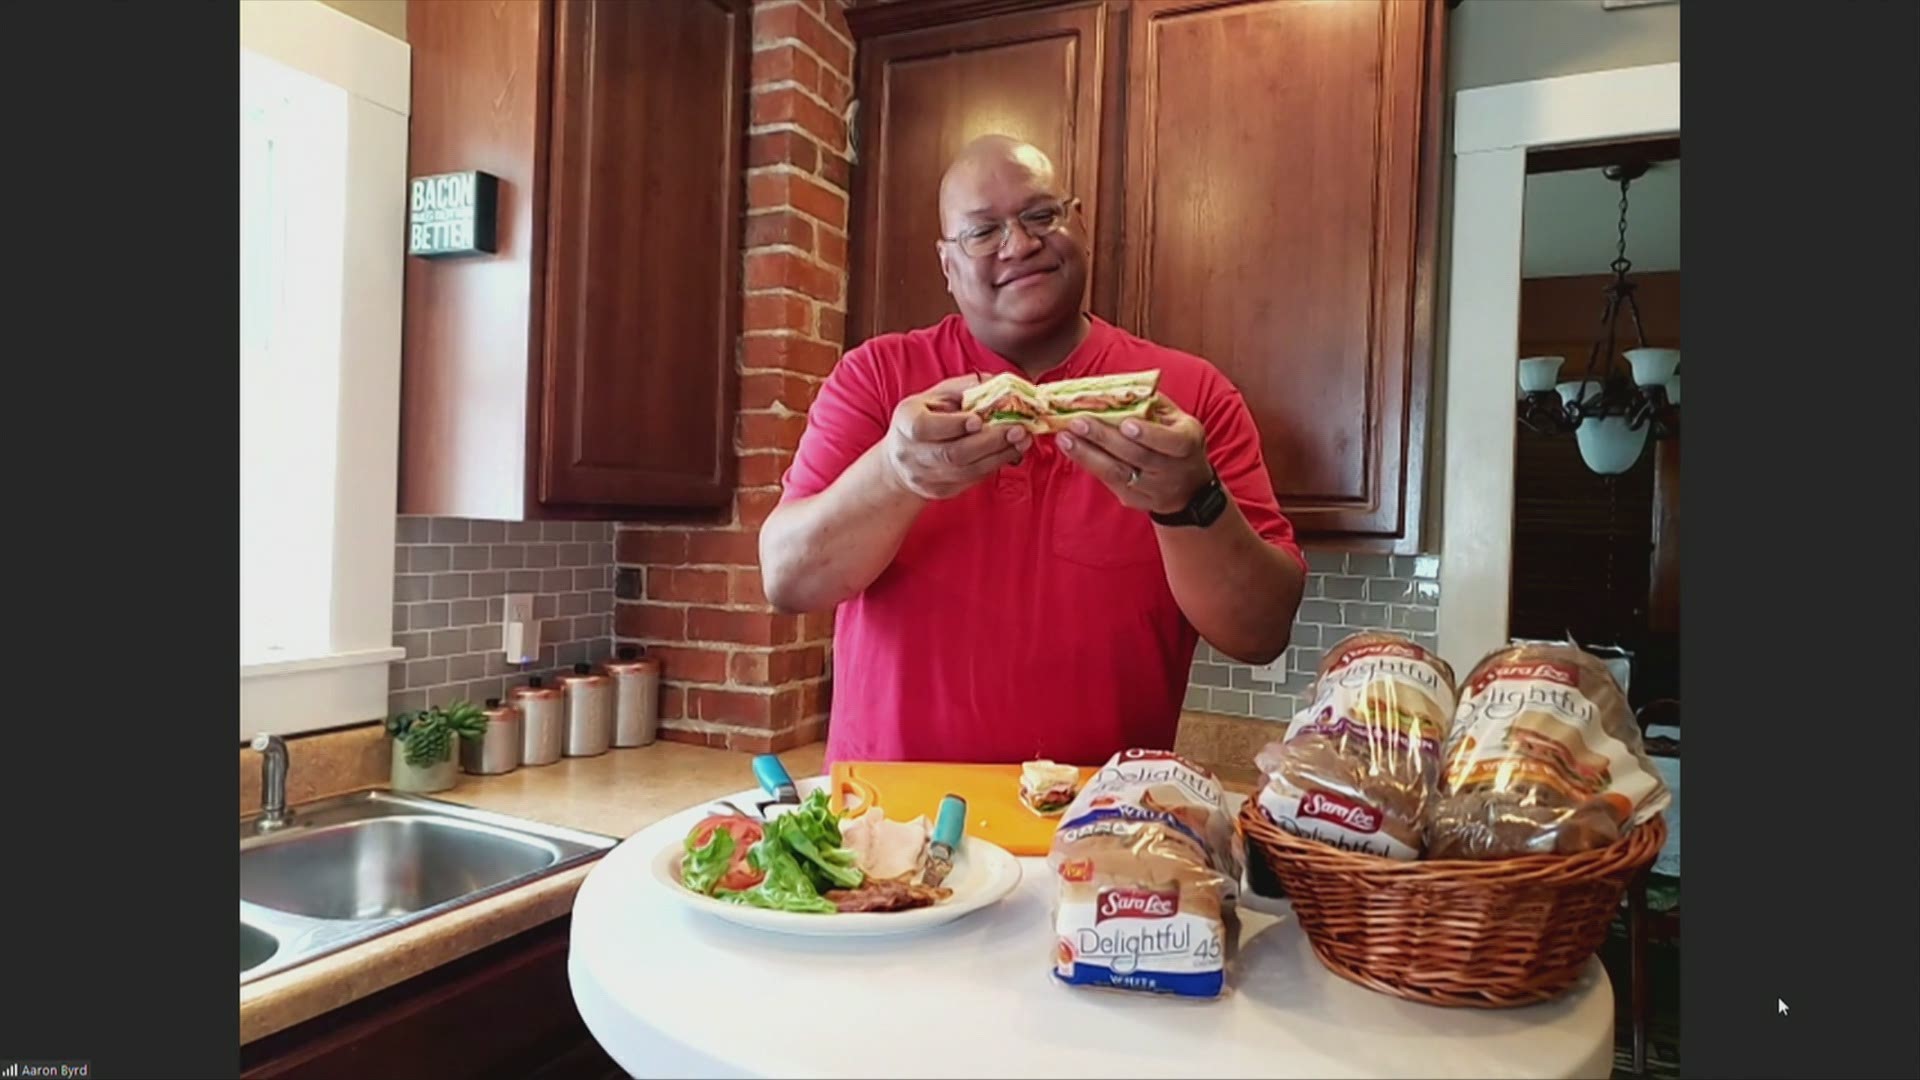 Chef Aaron Byrd creates Club Sandwich with new Delightful bread from Sara Lee that has only 45 calories a slice and tastes great! | PAID CONTENT